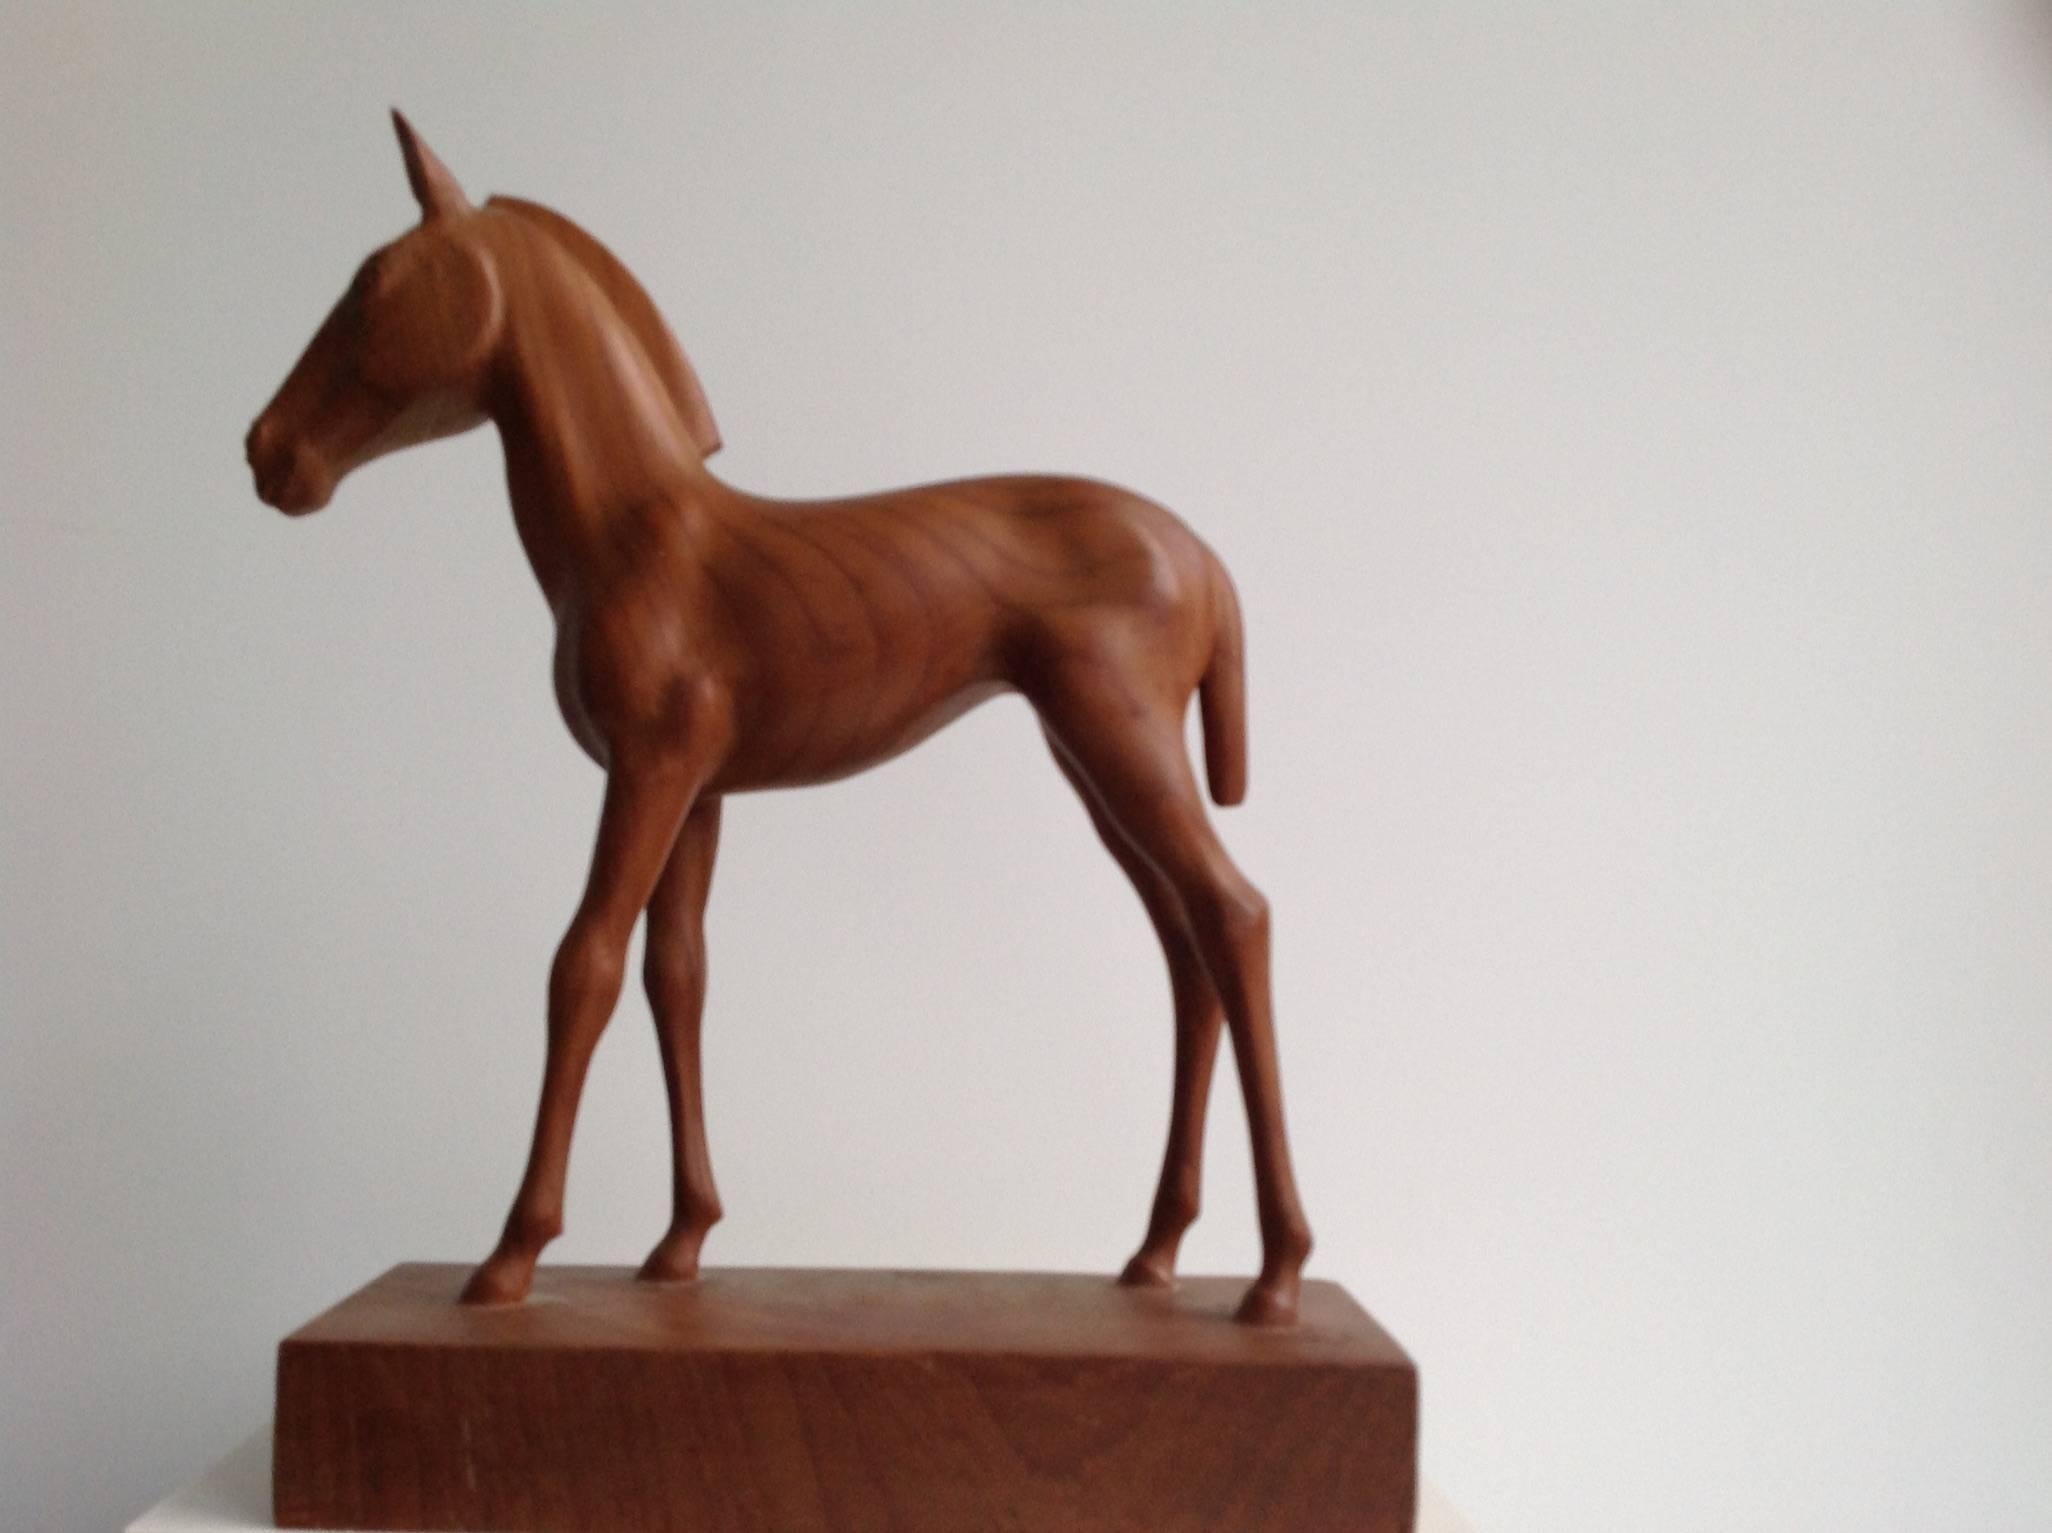 A pretty sculpture of a foal made in teak, signed and dated.